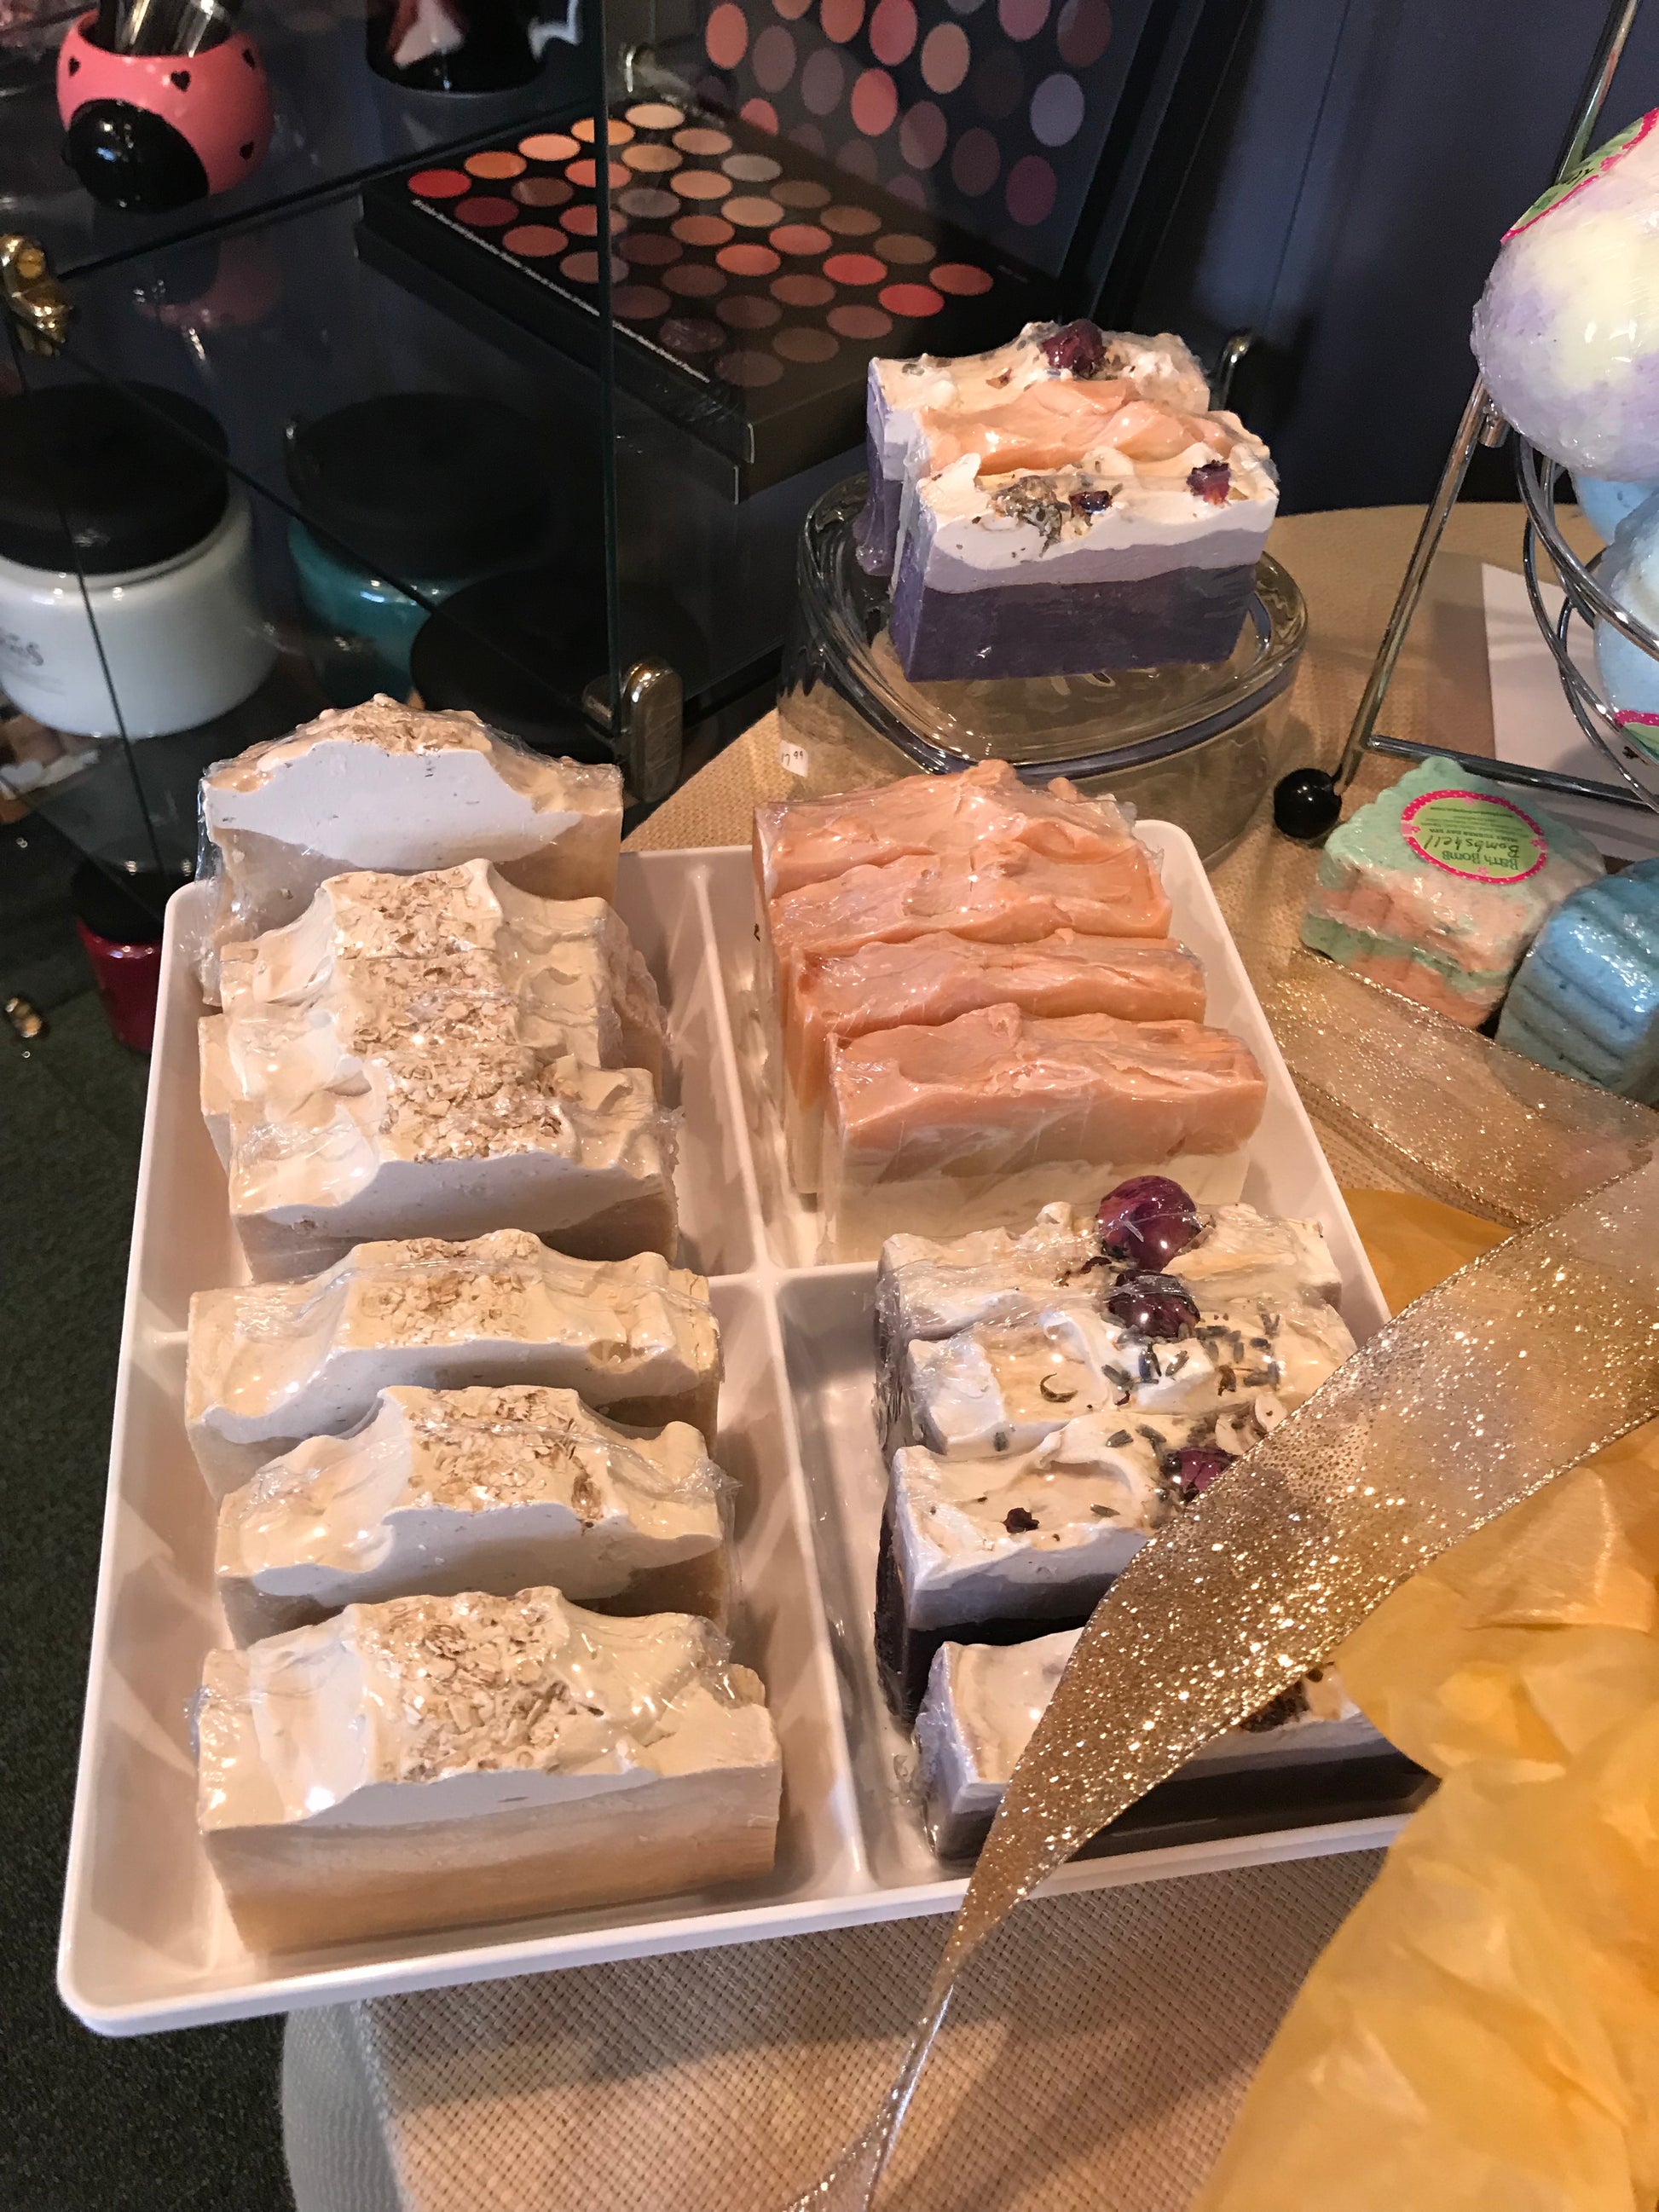 Mary Turner Bath Collection - Handmade Soap Bars - Mary Turner Day Spa & Boutique